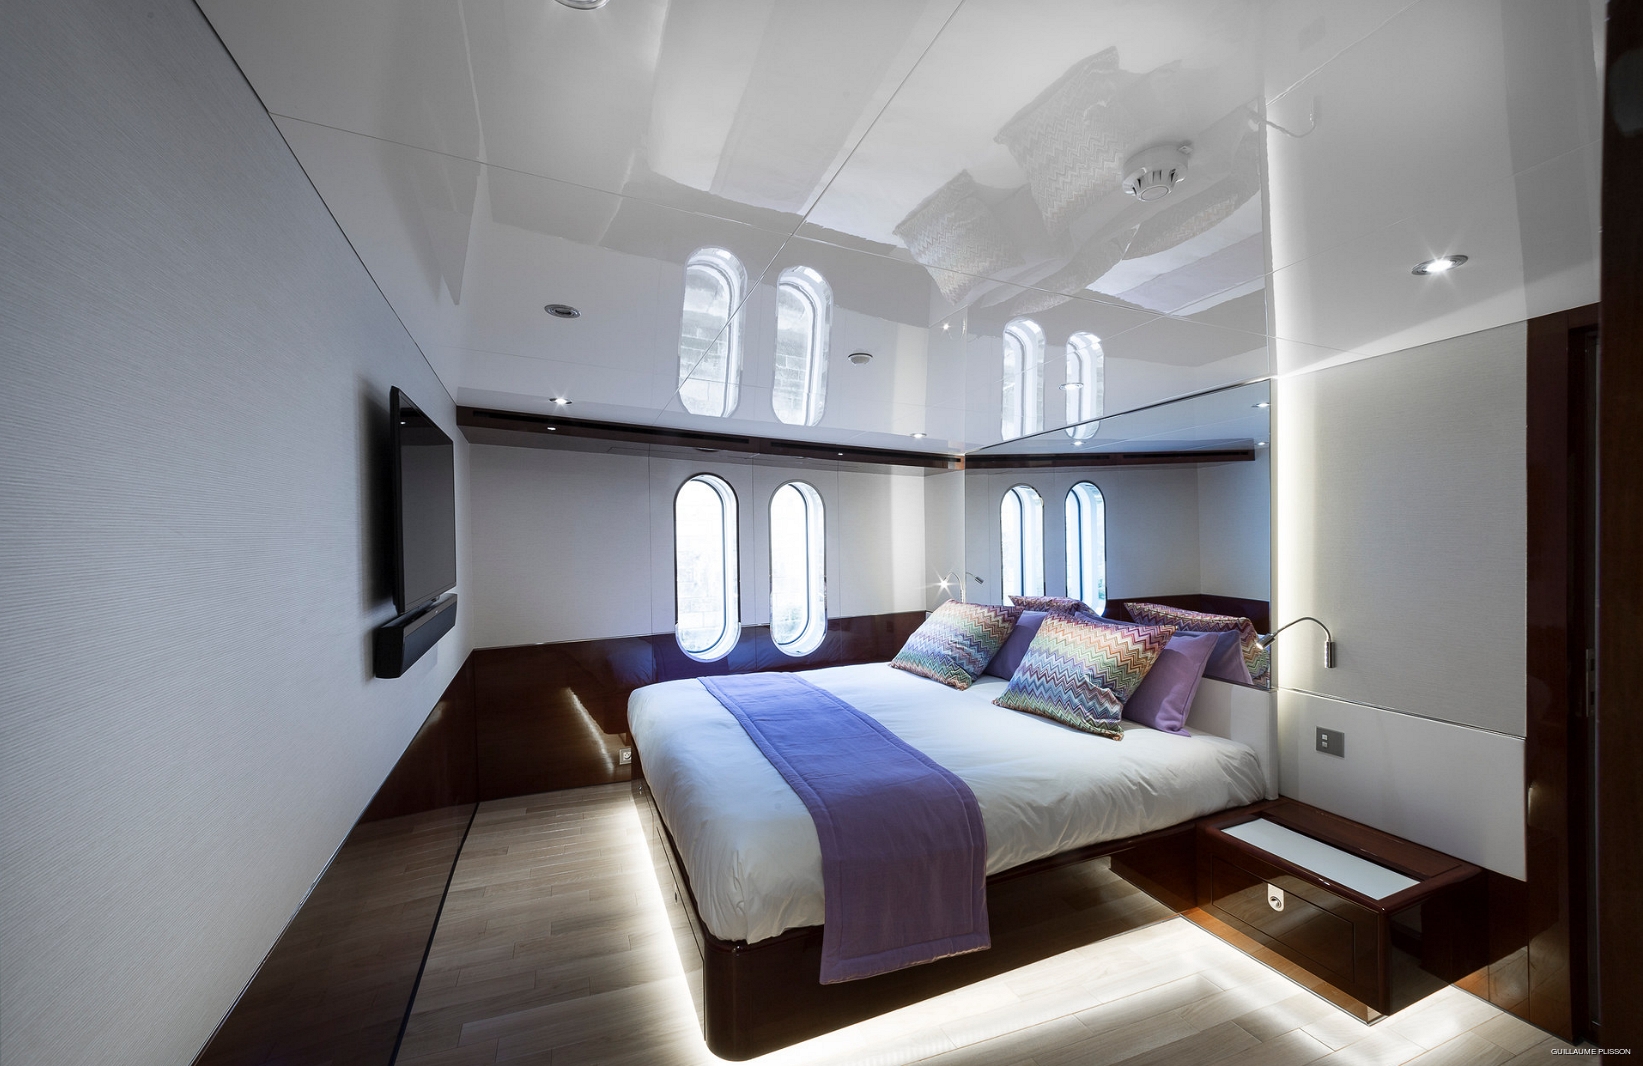 Guest's Stateroom On Yacht ENIGMA XK